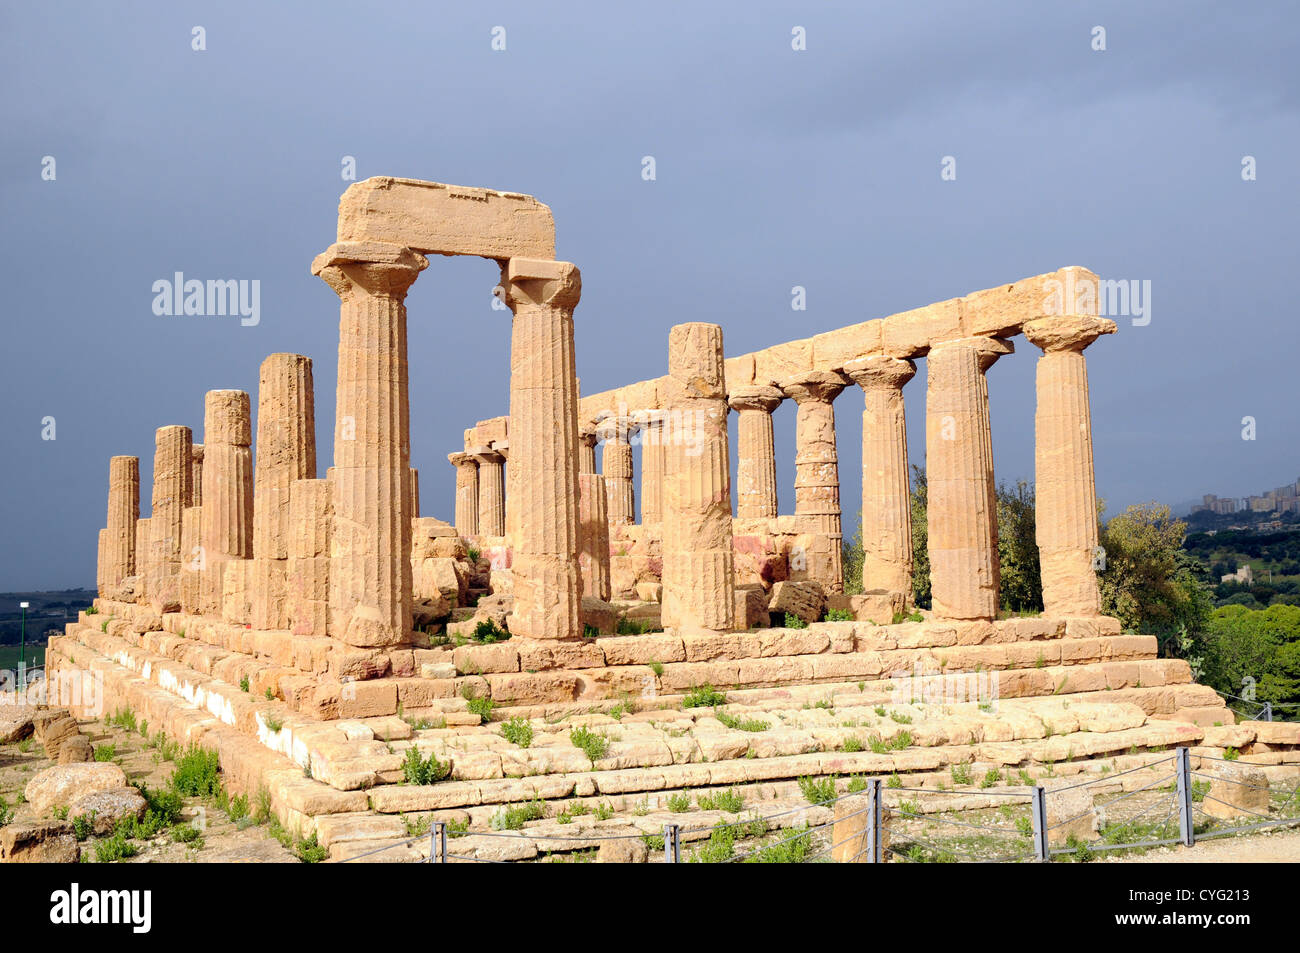 Temple of Hera (Juno). The Valley of the Temples, Agrigento, Sicily Stock Photo